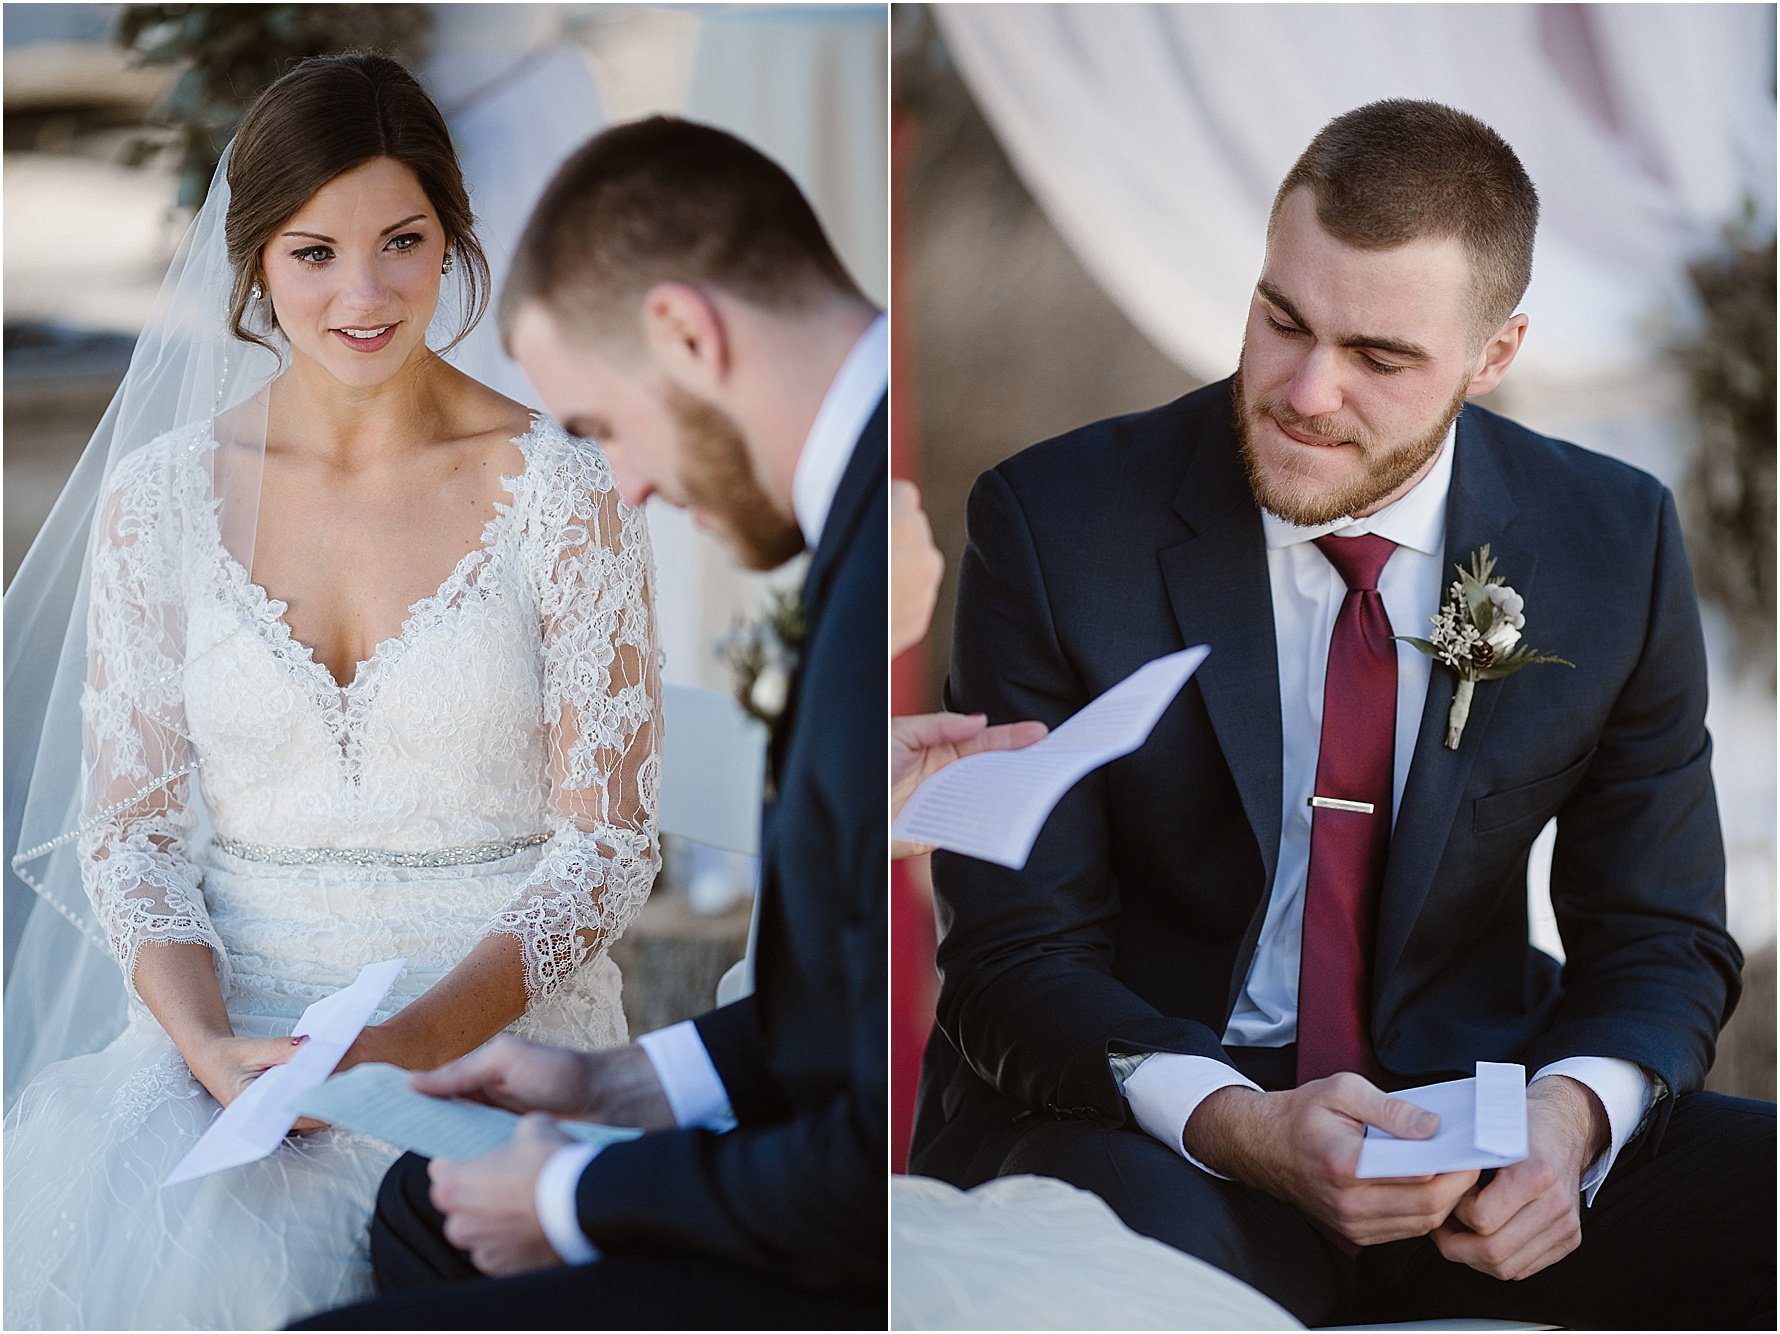 Winter Wedding at Dara's Garden in Knoxville | Erin Morrison Photography www.erinmorrisonphotography.com